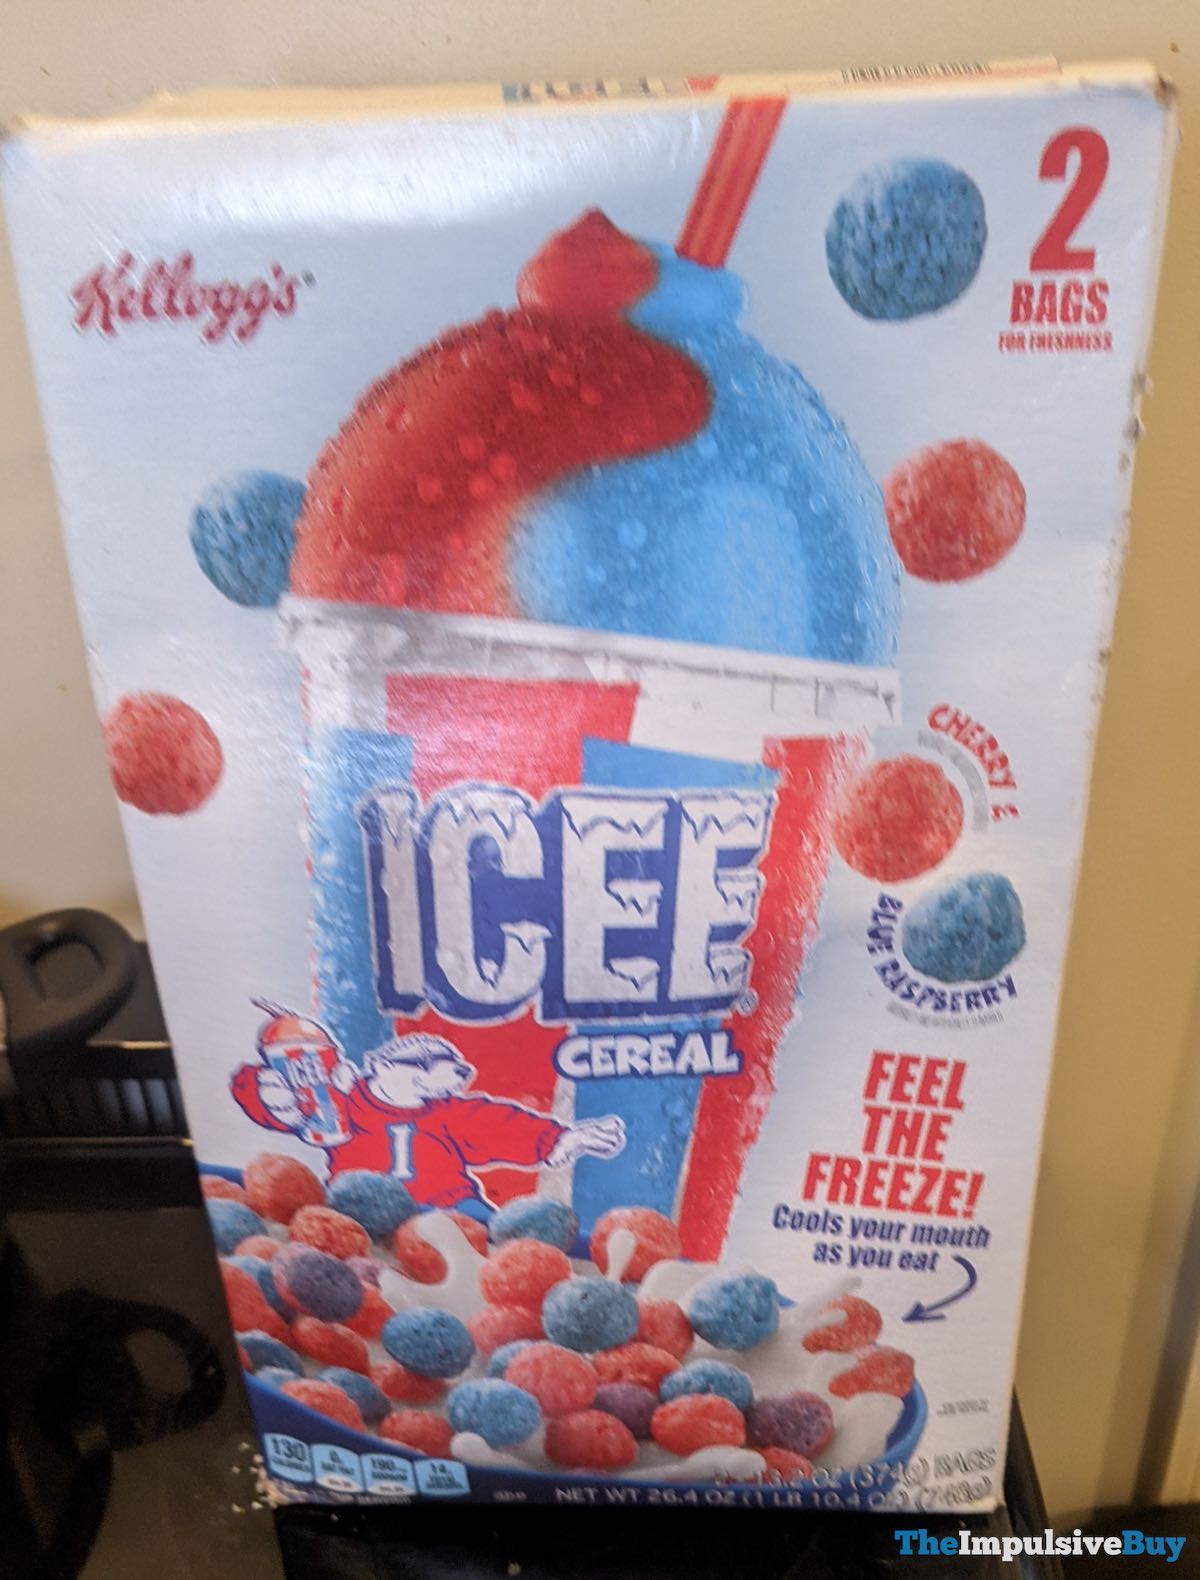 Spotted Kelloggs Icee Cereal The Impulsive Buy 5688